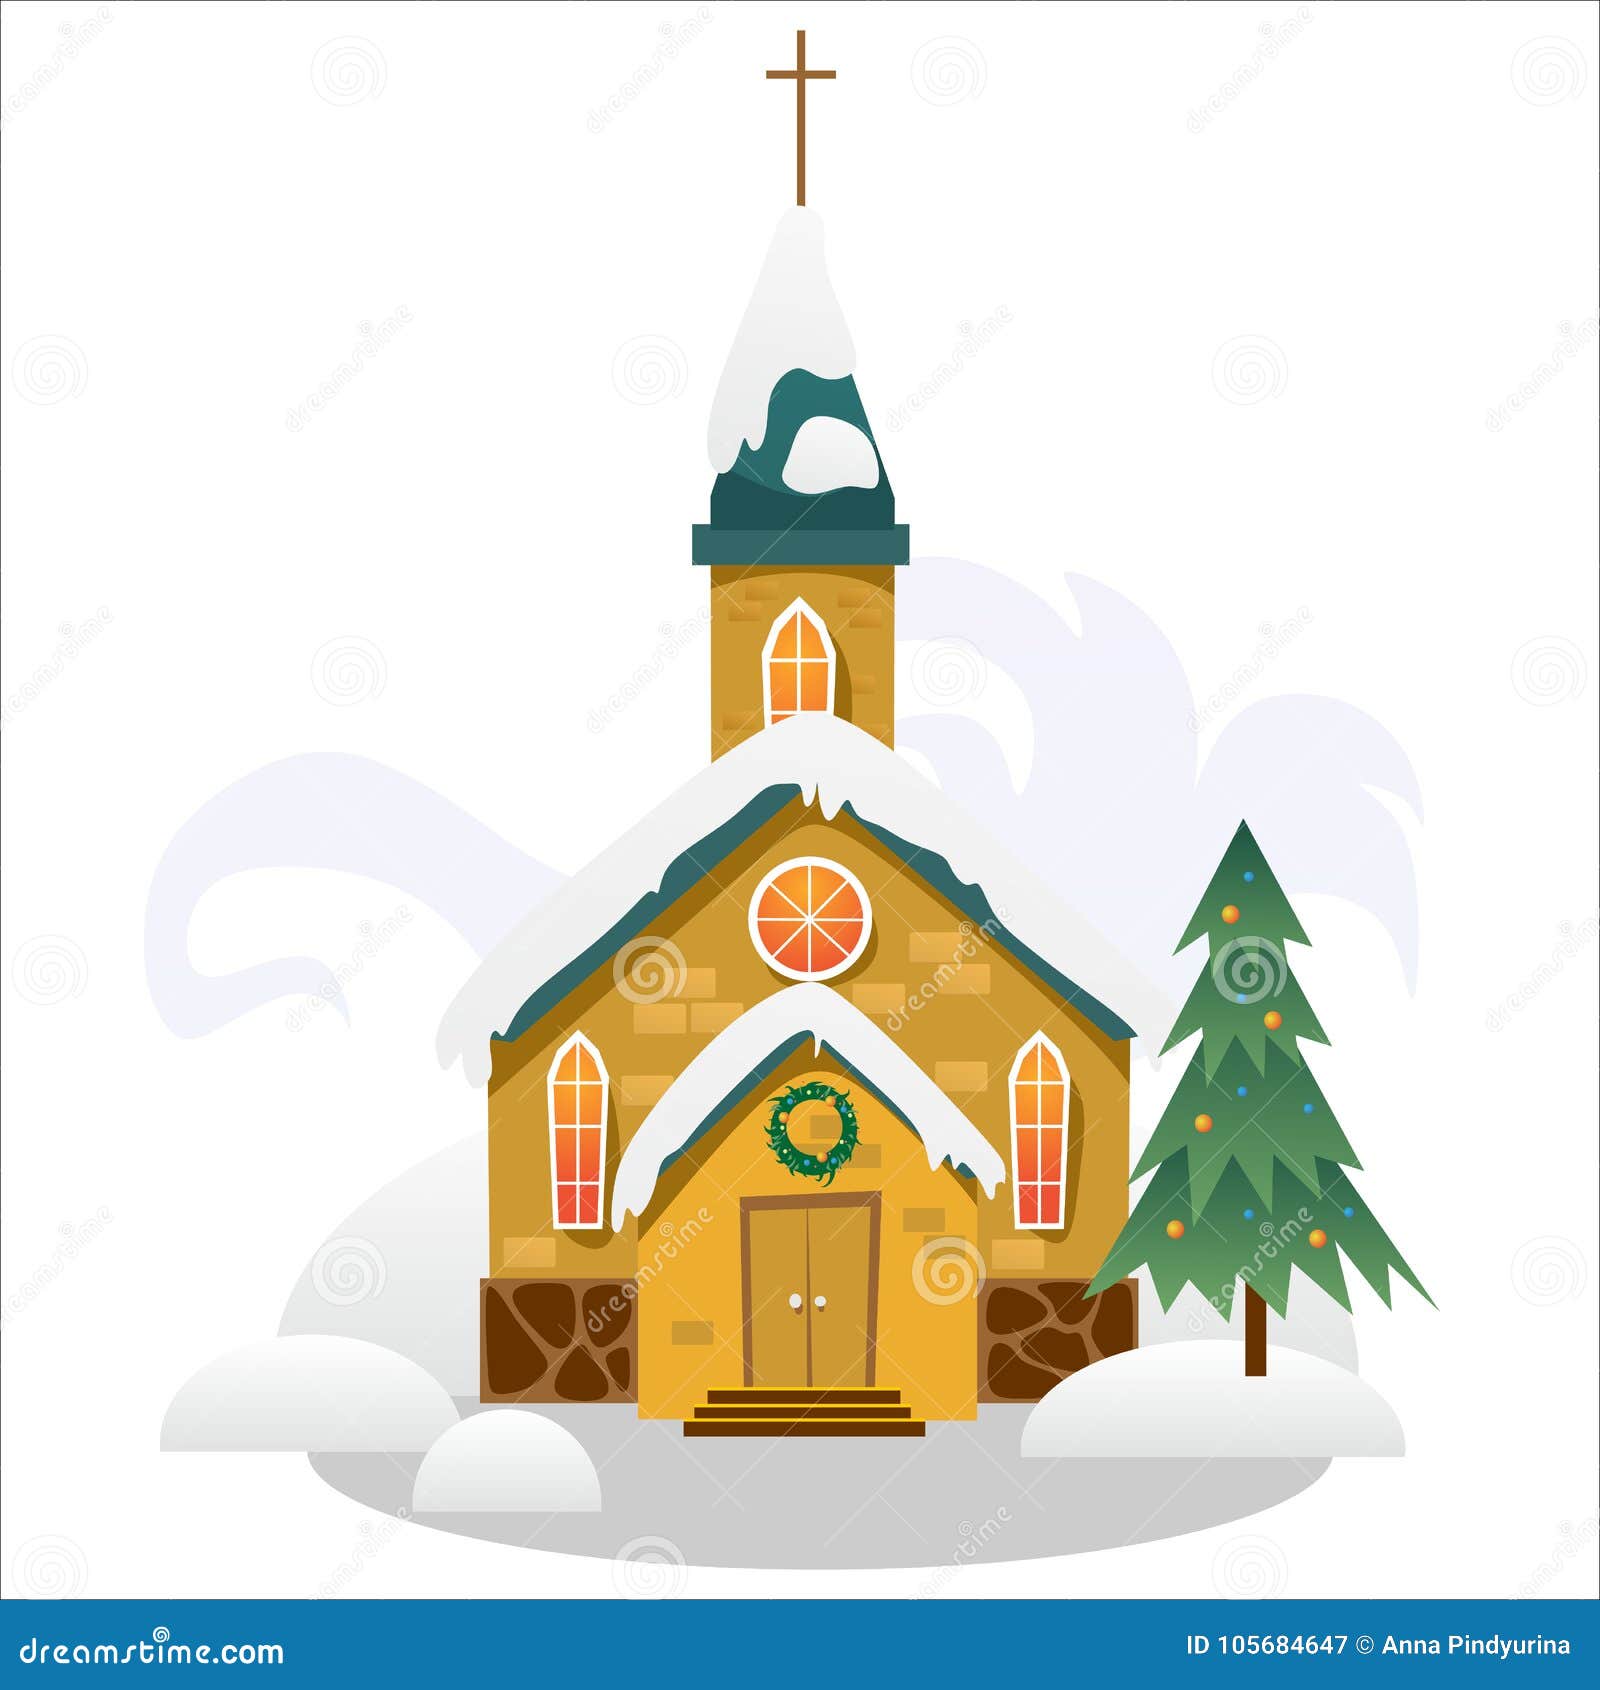 Religion Clipart-church building with steeple and trees vector illustration  clip